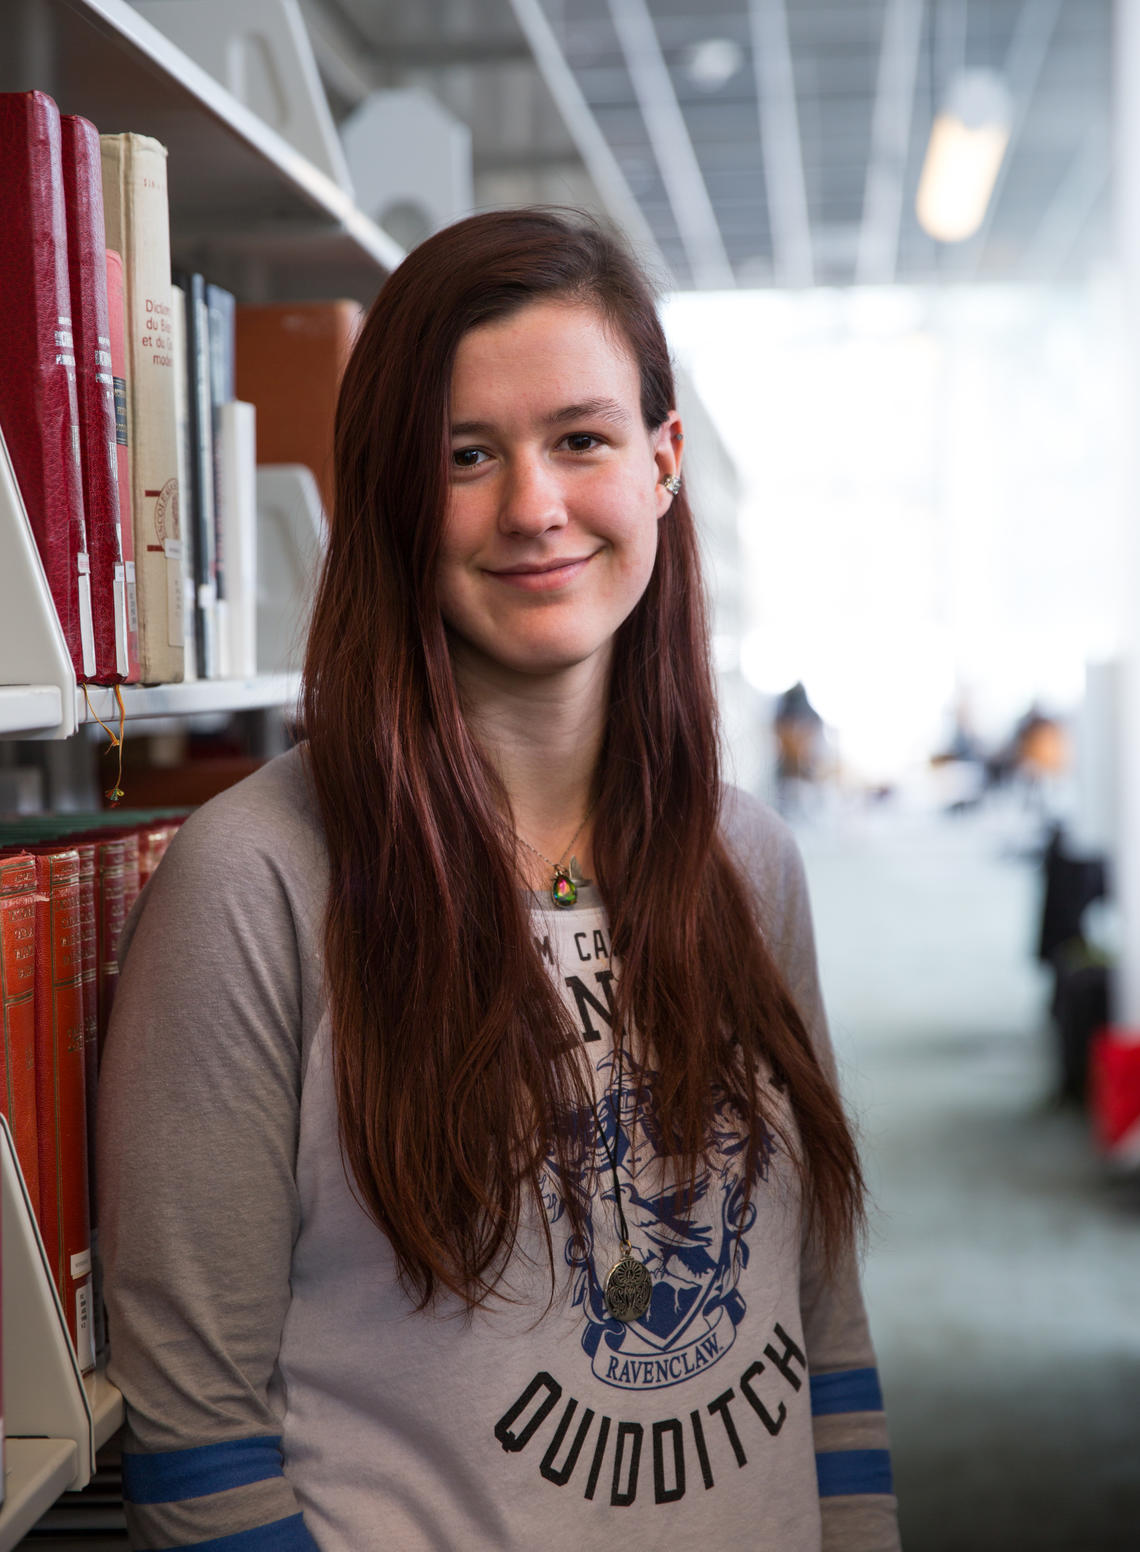 Kate Anderson's interest in analyzing old and rare books got a boost from PURE, the Program for Undergraduate Research Experience.